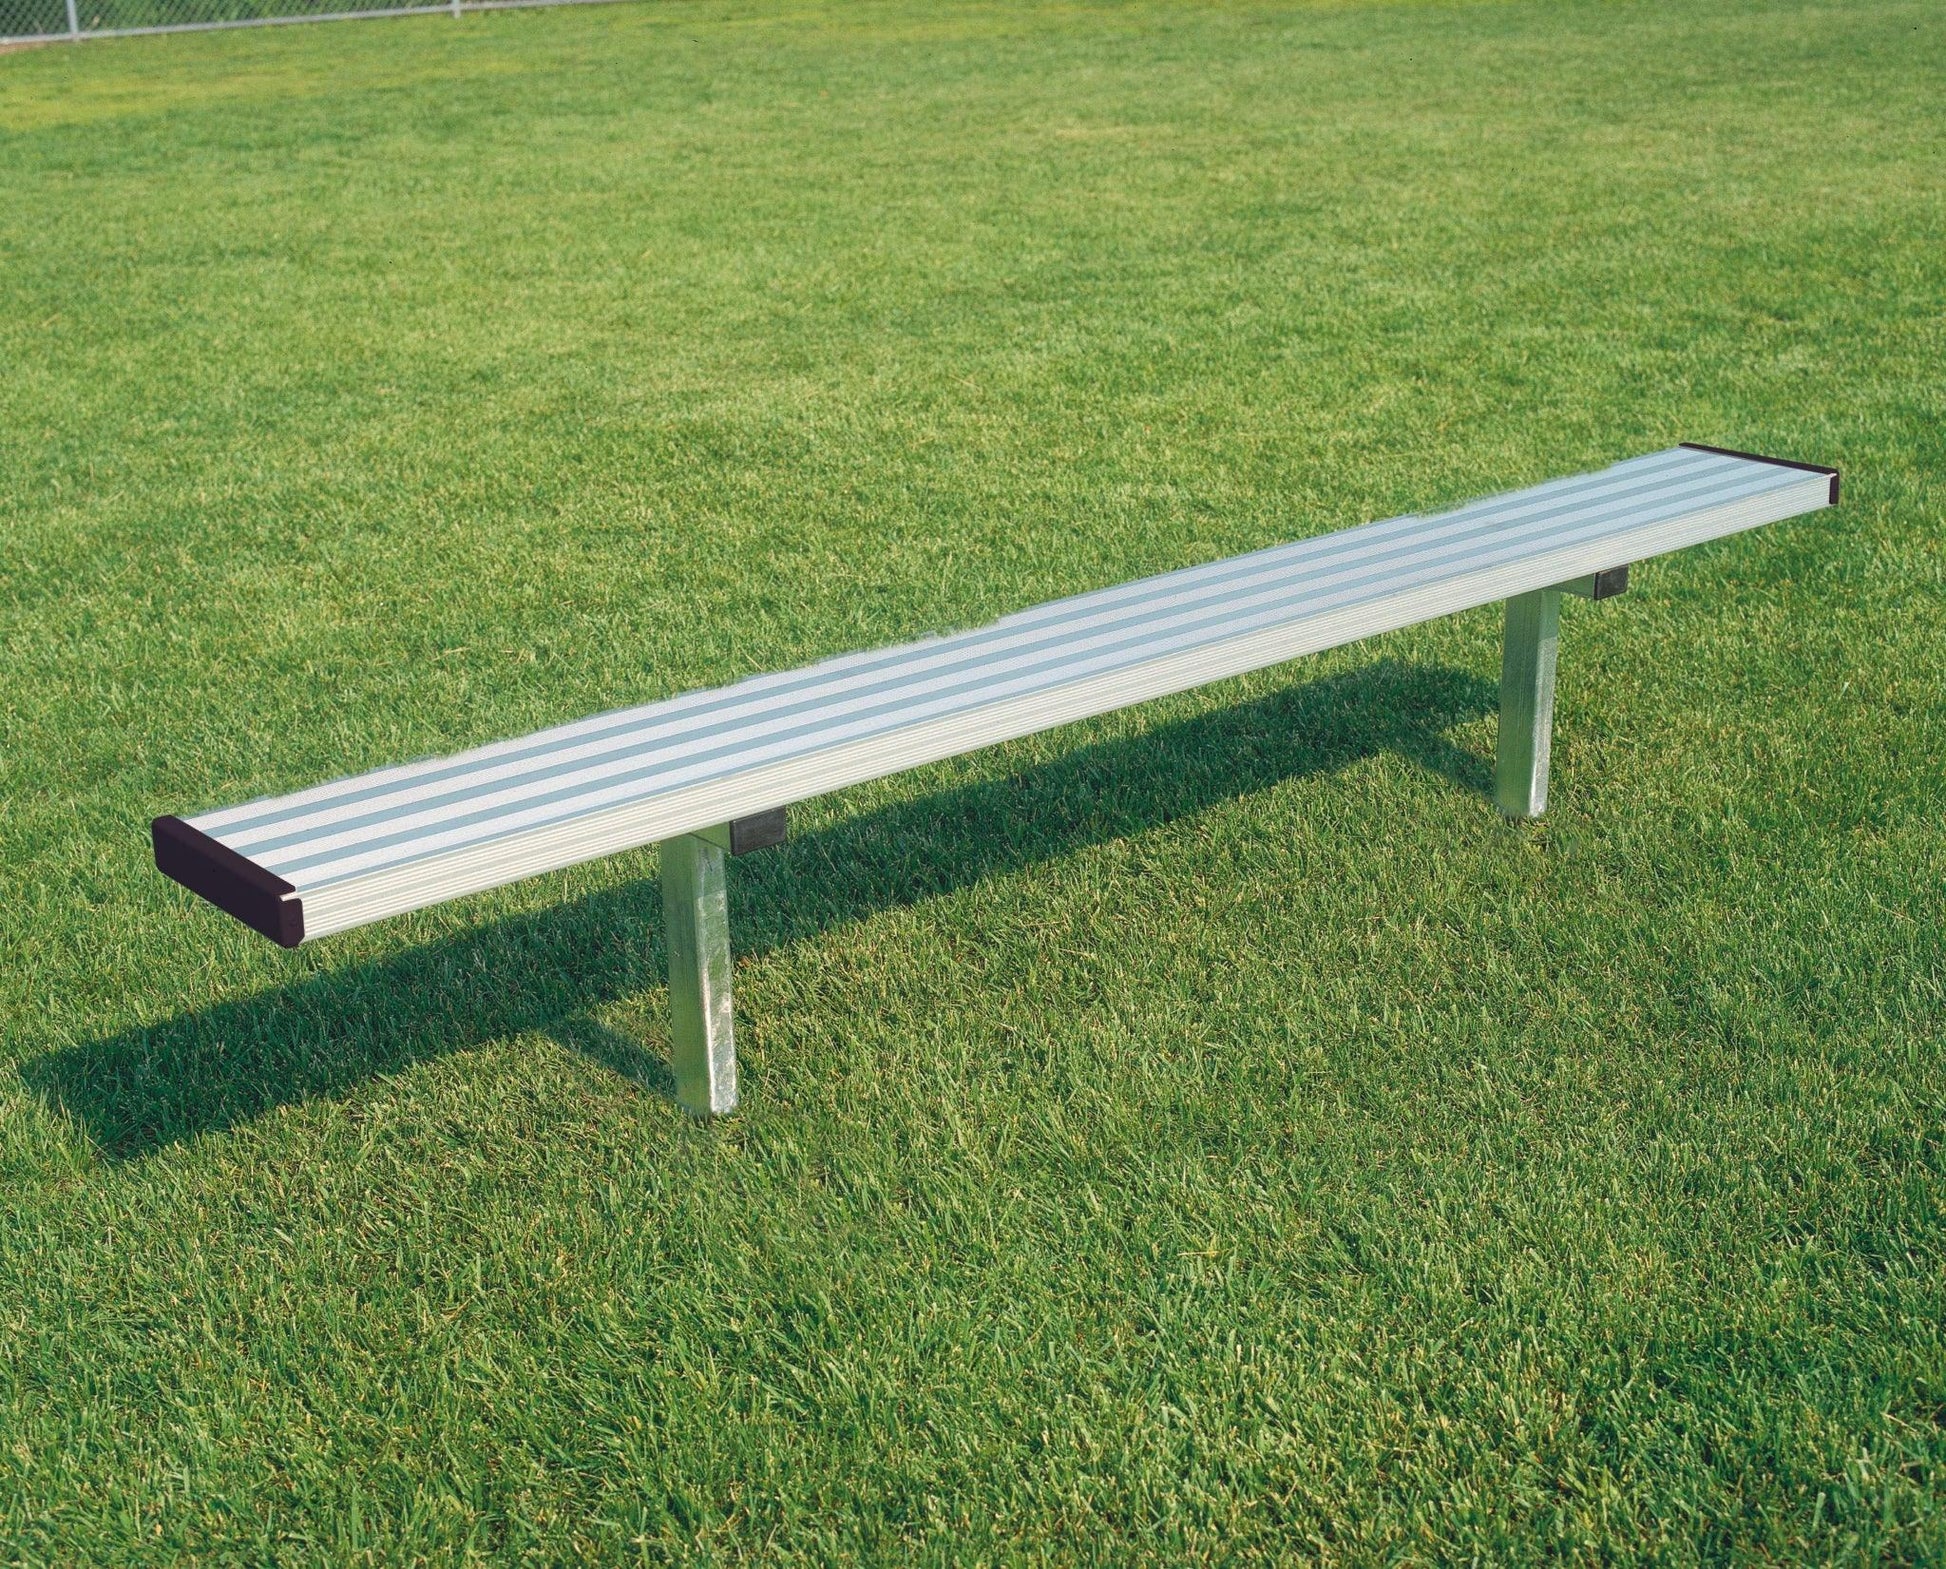 Player Bench without Backrest, Fixed or Portable - bisoninc